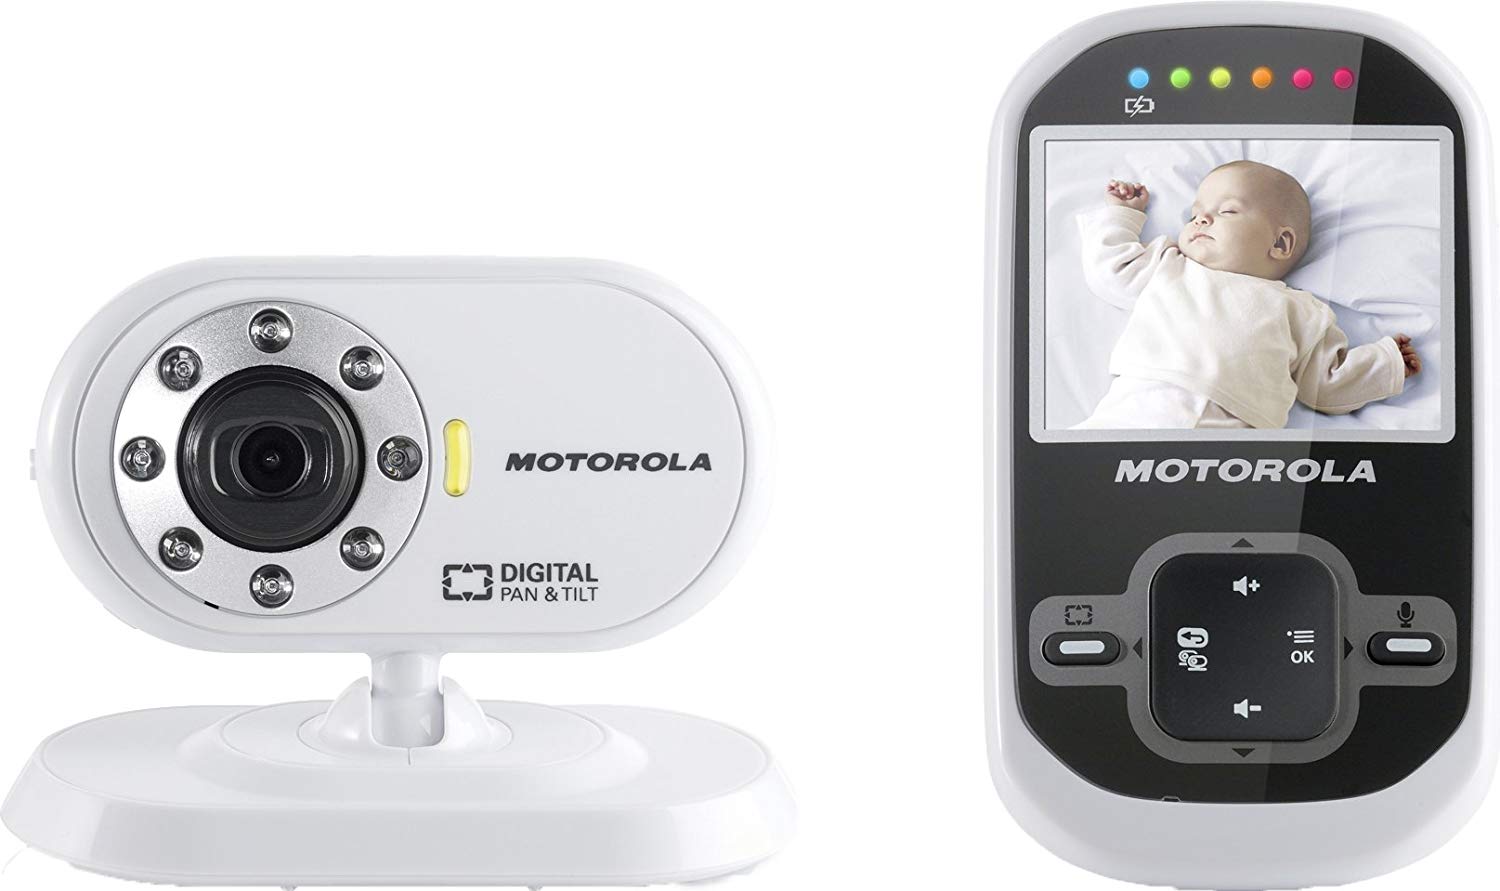 Motorola MBP 26 – Video Baby Monitor with 2.4 Inch Color Display and up to 300 m Range, White